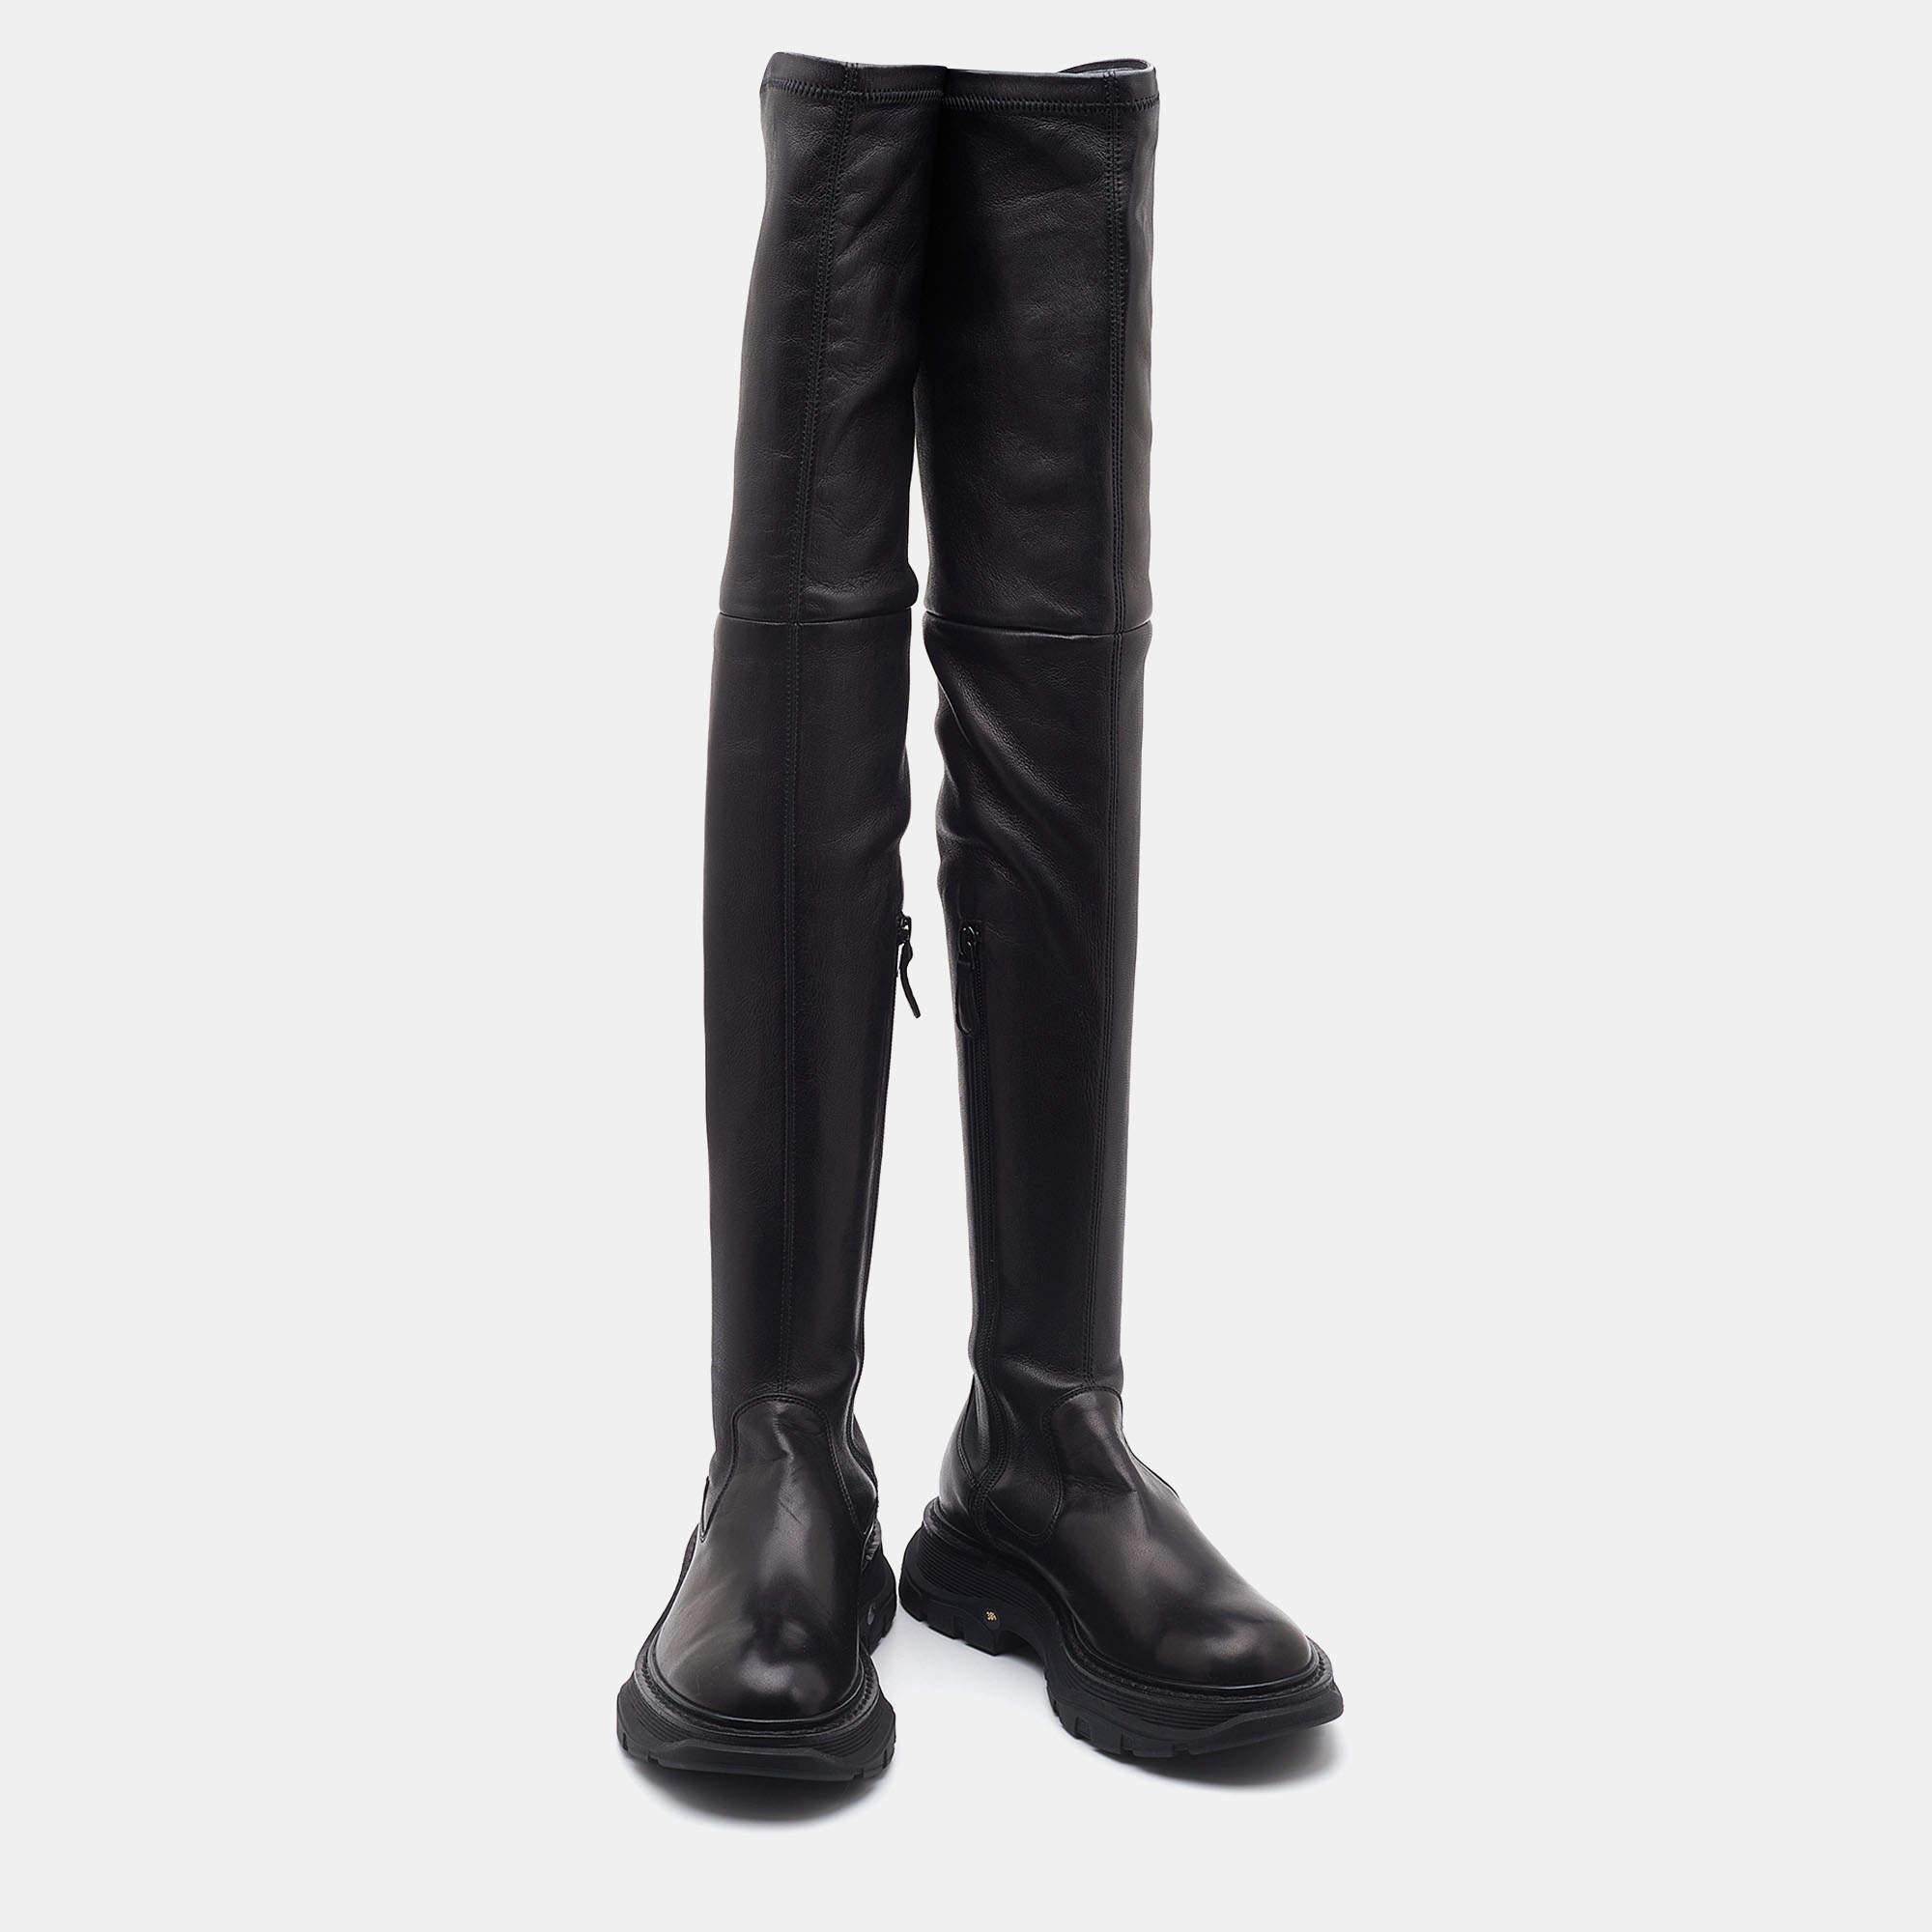 Alexander McQueen Black Leather Over The Knee Boots Size 38.5 1